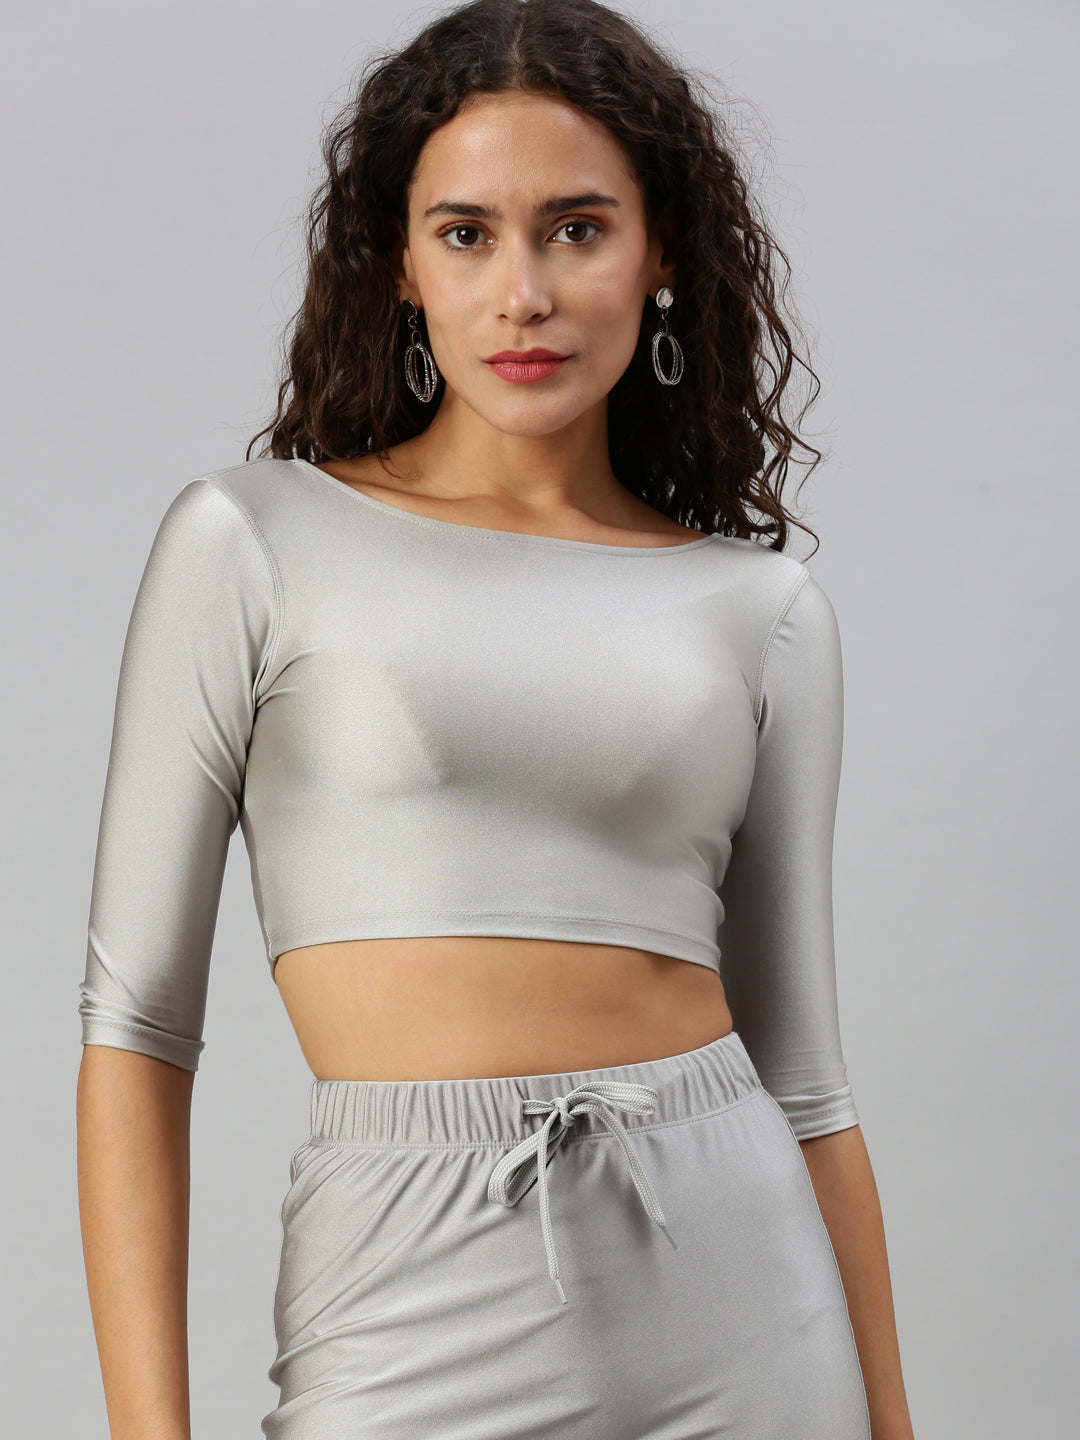 Blouse Elbow Sleeve-Super Silver